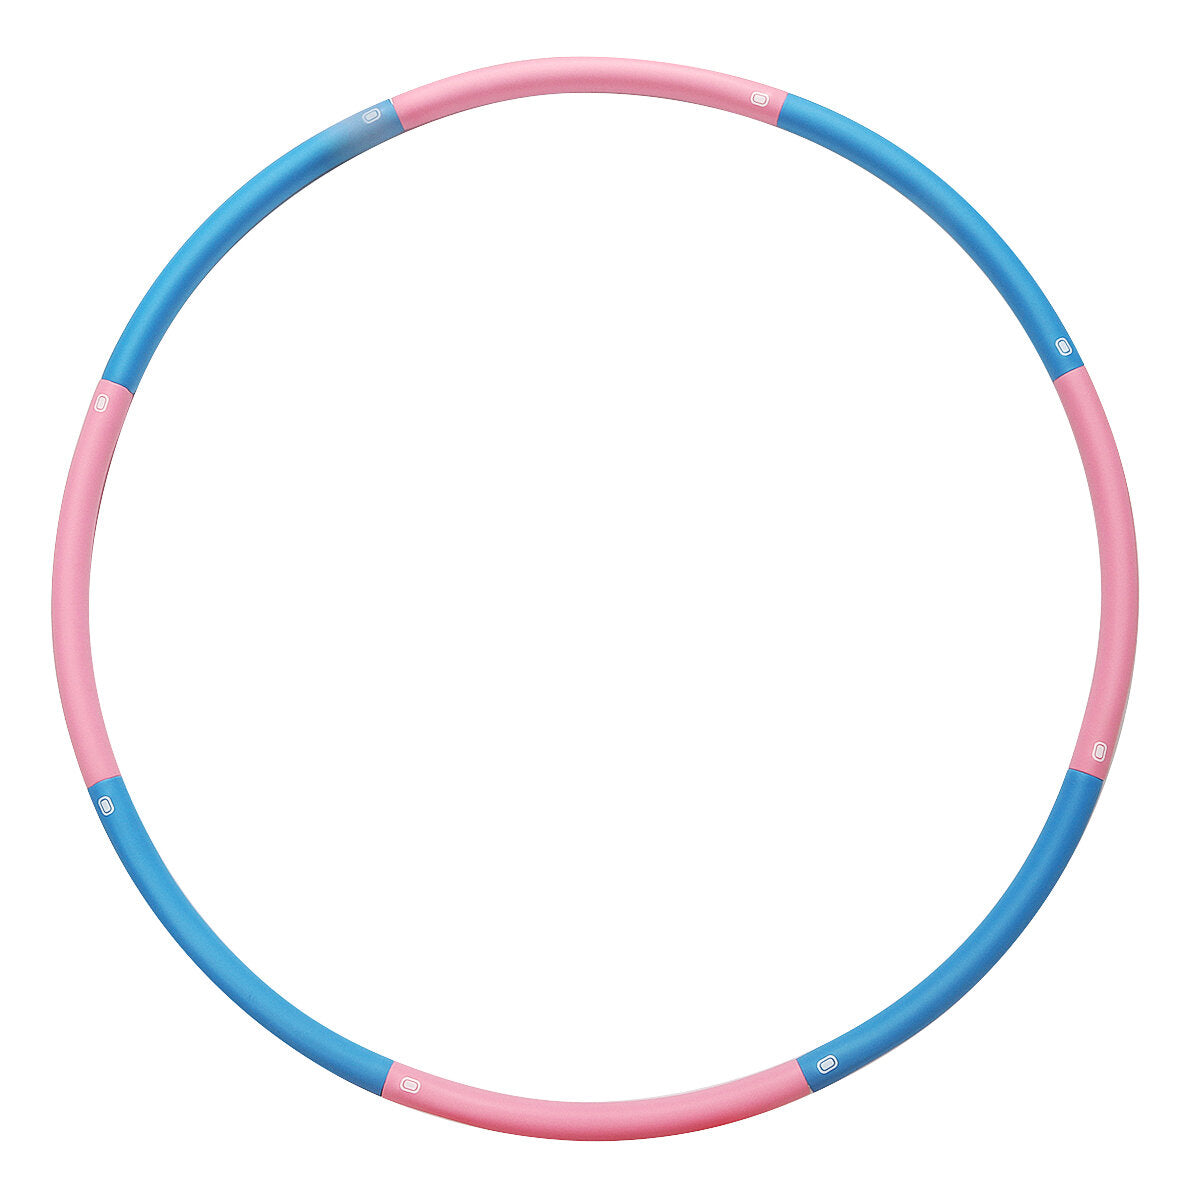 8 Section Removable Sport Hoops 37.4inch Portable Abdominal Exercise Slimming Gymnastic Circle Fitness Gym